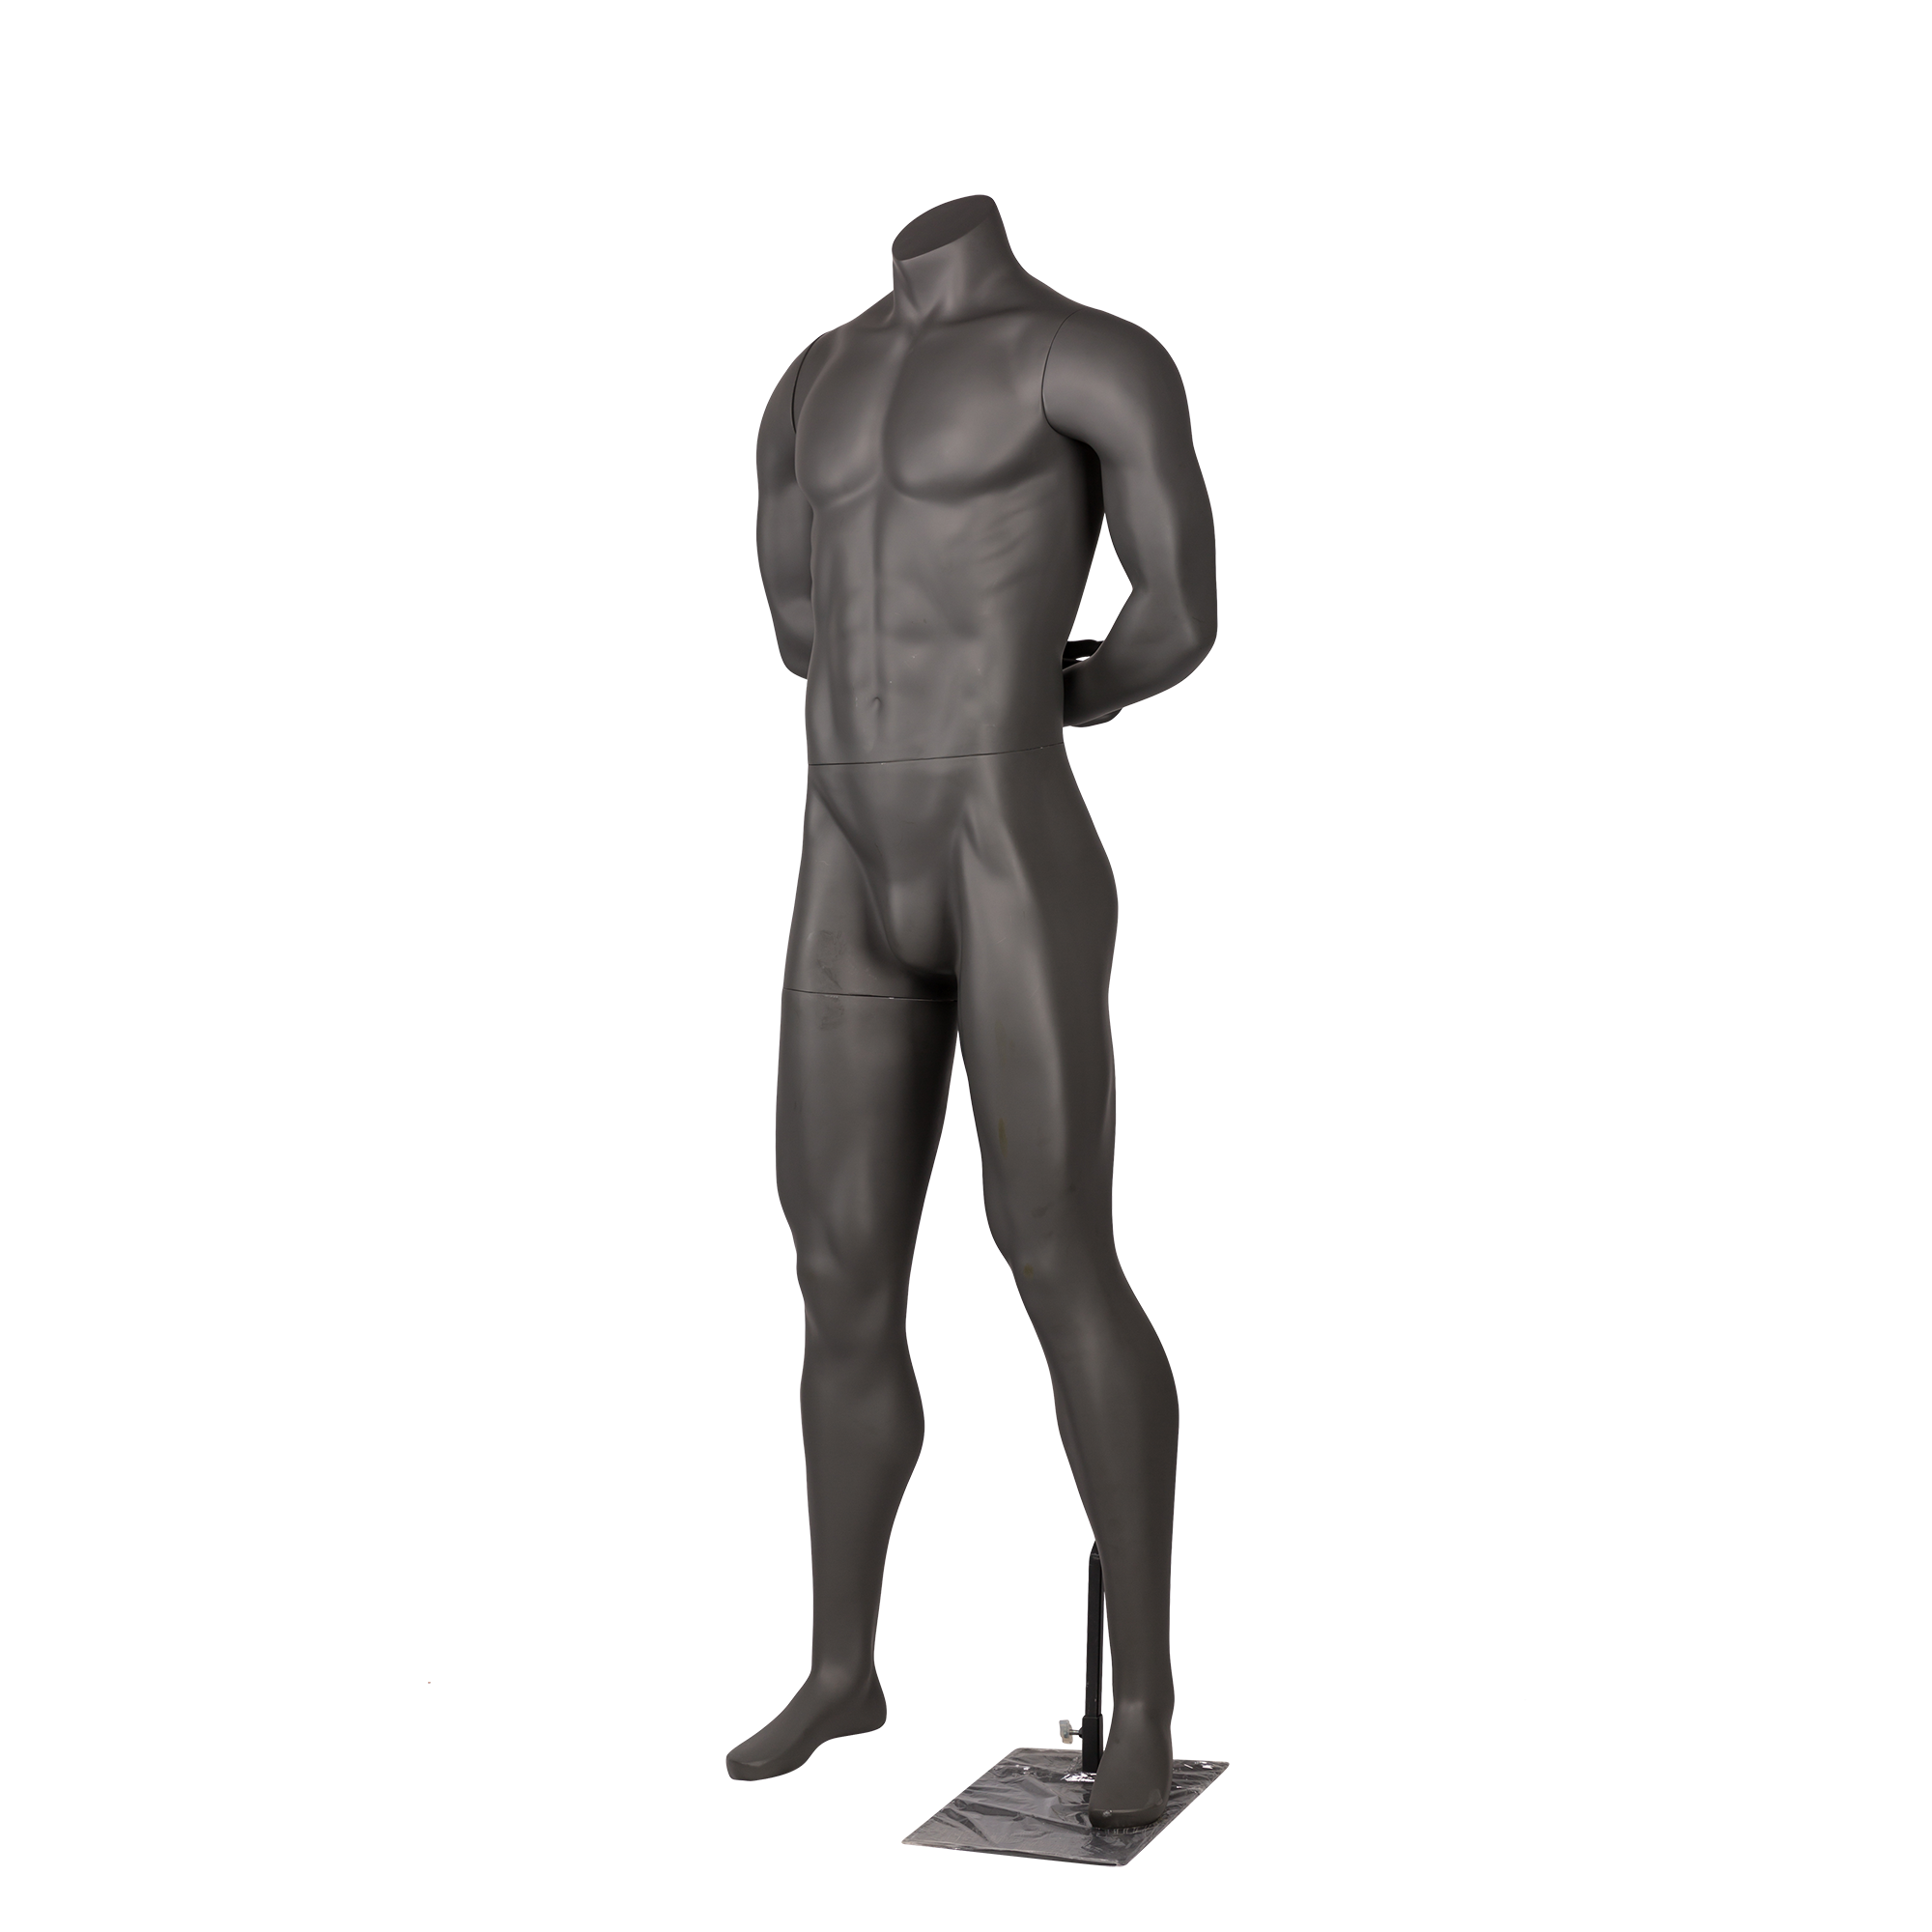 Headless Male Training Mannequin with hand back